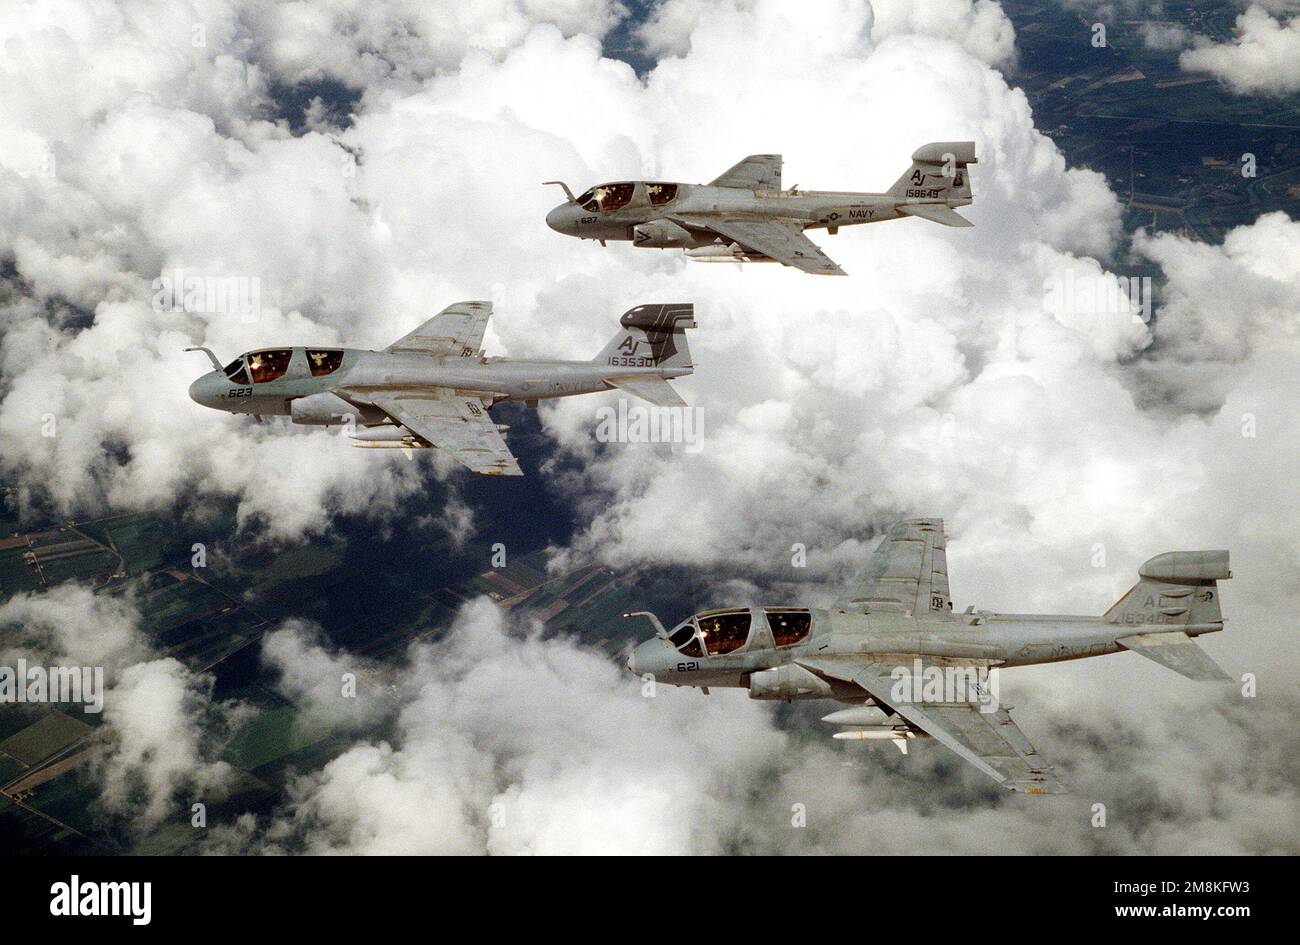 An air-to-air view of three Navy EA-6B Prowler aircraft flying in formation on a training mission. They are (top to bottom) VAQ-209 Star Warriors, VAQ-141 Shadowhawks and VAQ-130 Zappers, all from Whidbey Island, WA. Exact Date Shot Unknown. Subject Operation/Series: DENY FLIGHT Base: Aviano Air Base State: Pordenone Country: Italy (ITA) Stock Photo